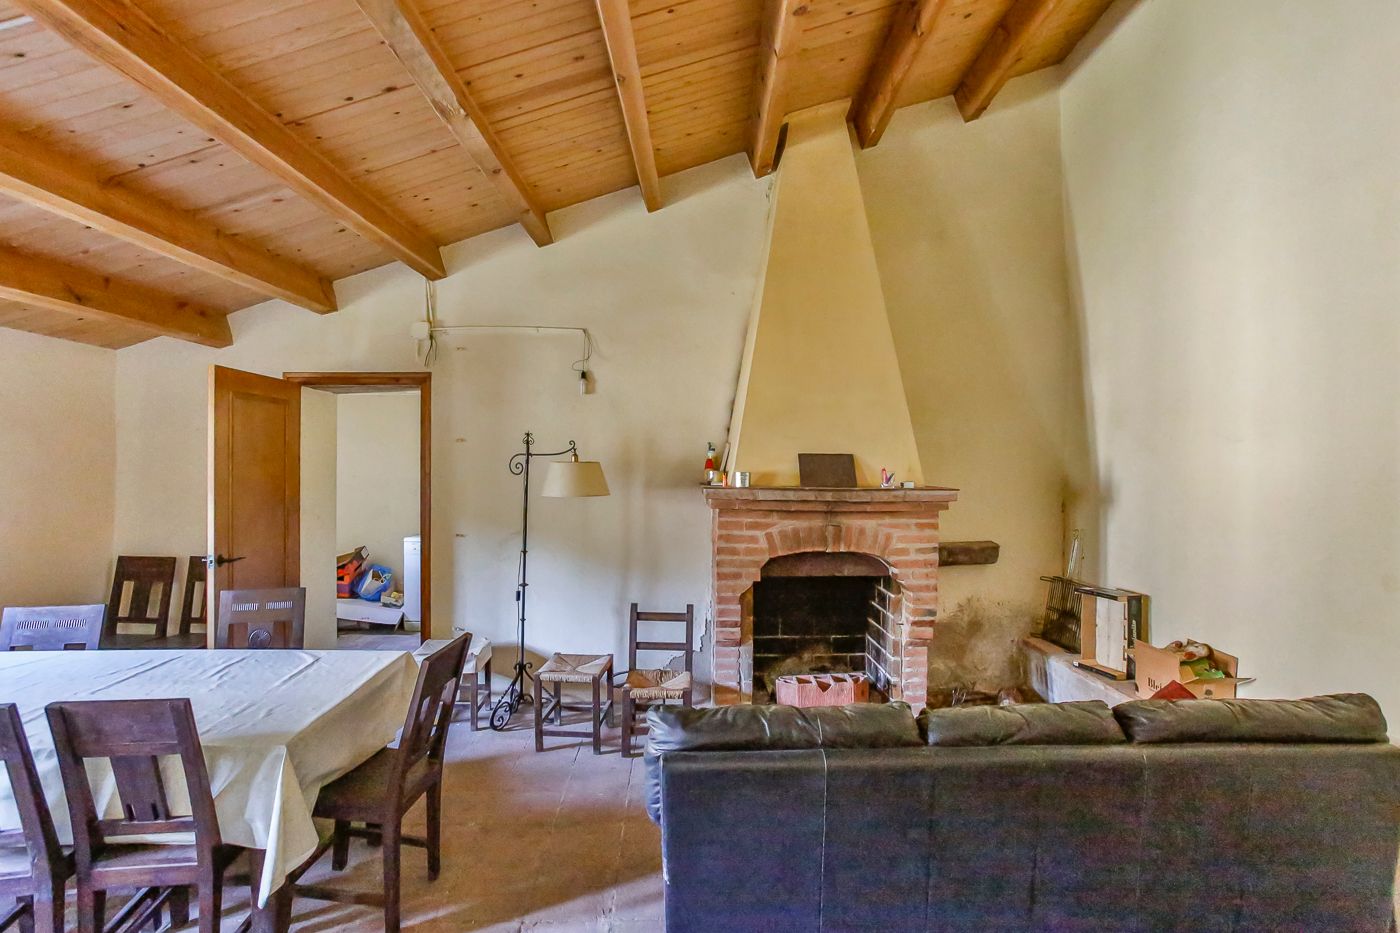 Rehabilitated farmhouse with farm of 100 hectares in Montseny.